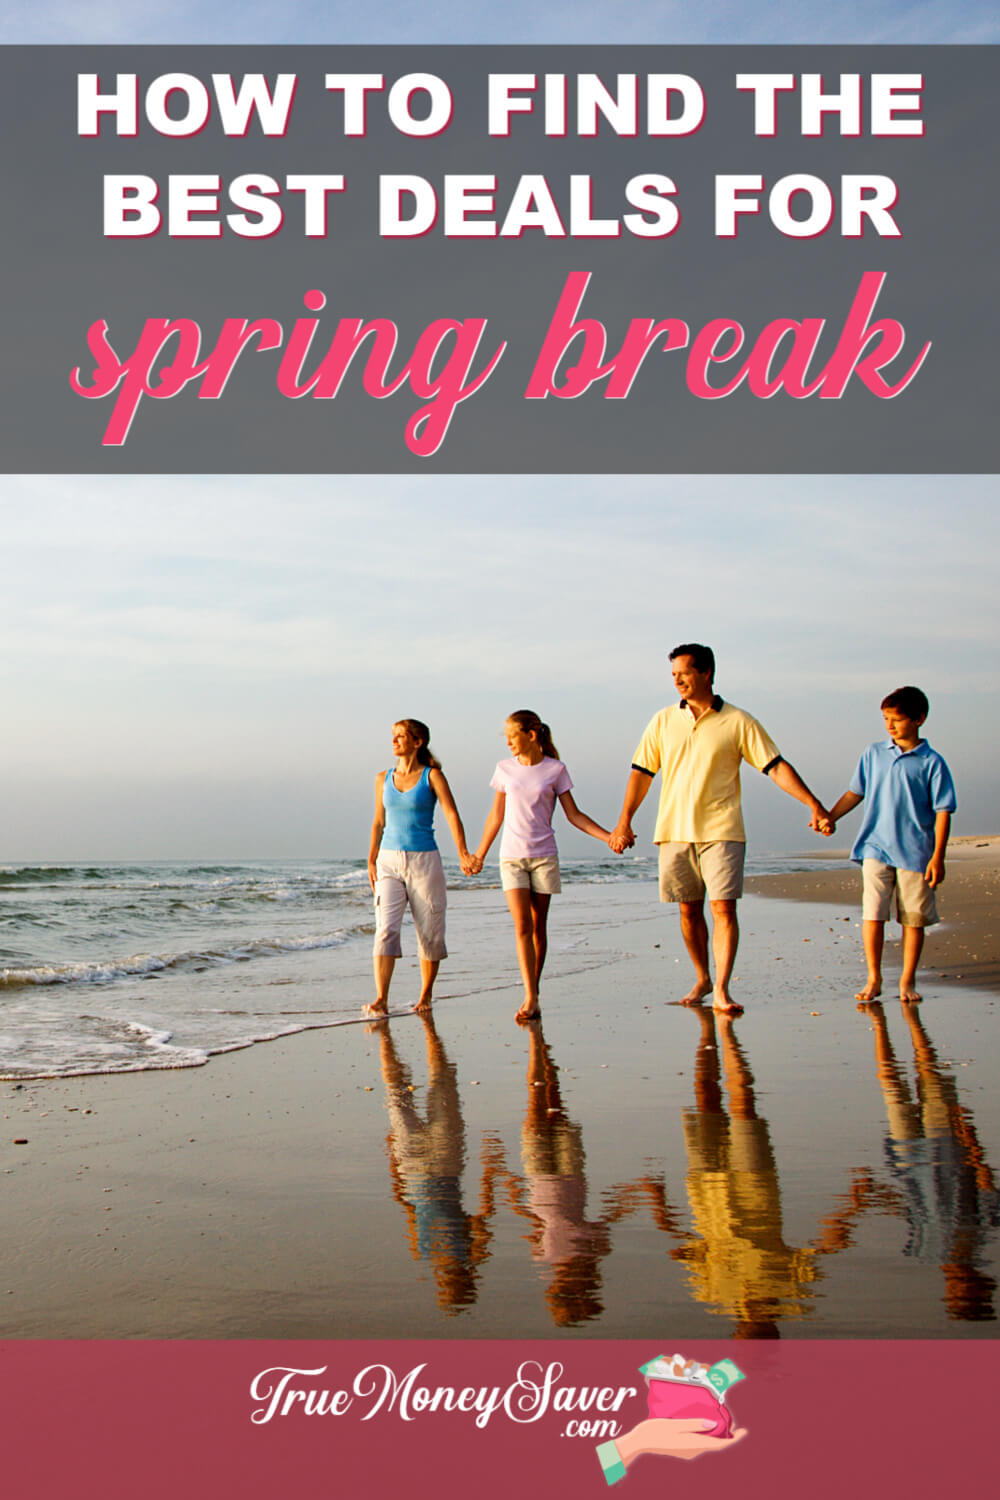 How To Find The Best Deals For Spring Break